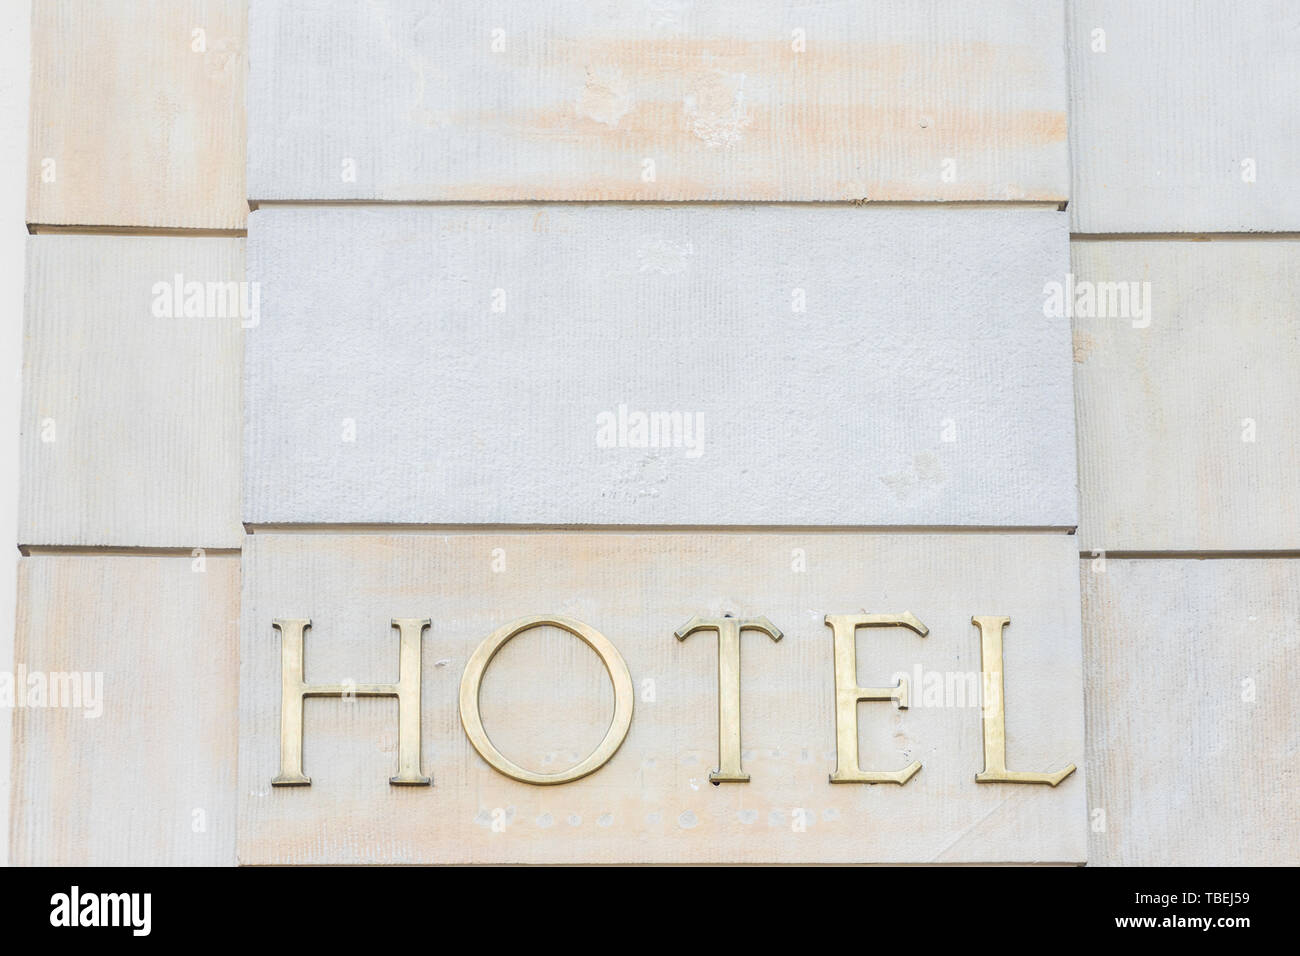 A generic hotel sign Stock Photo